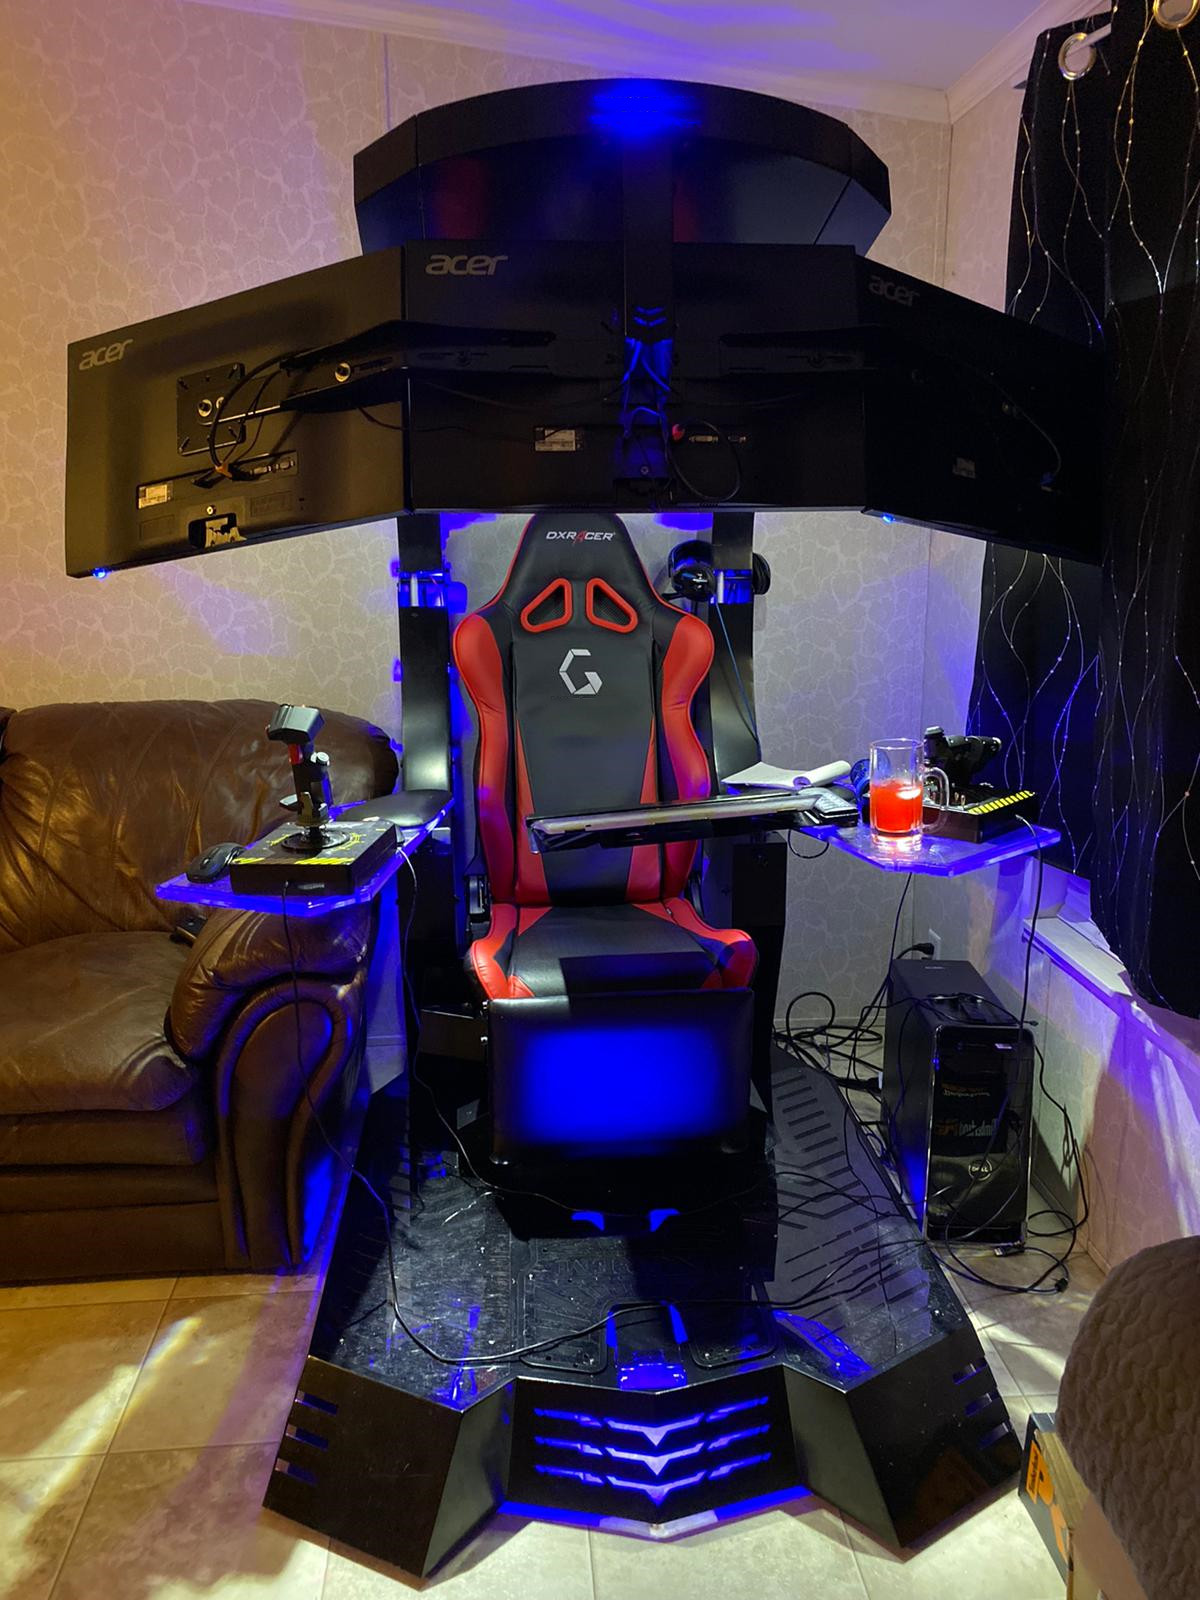 J20 Veryon PC Chair recliner Workstation Gaming cockpit since 2015 Dual roof arm option with heat and massage cushion support 3 screens